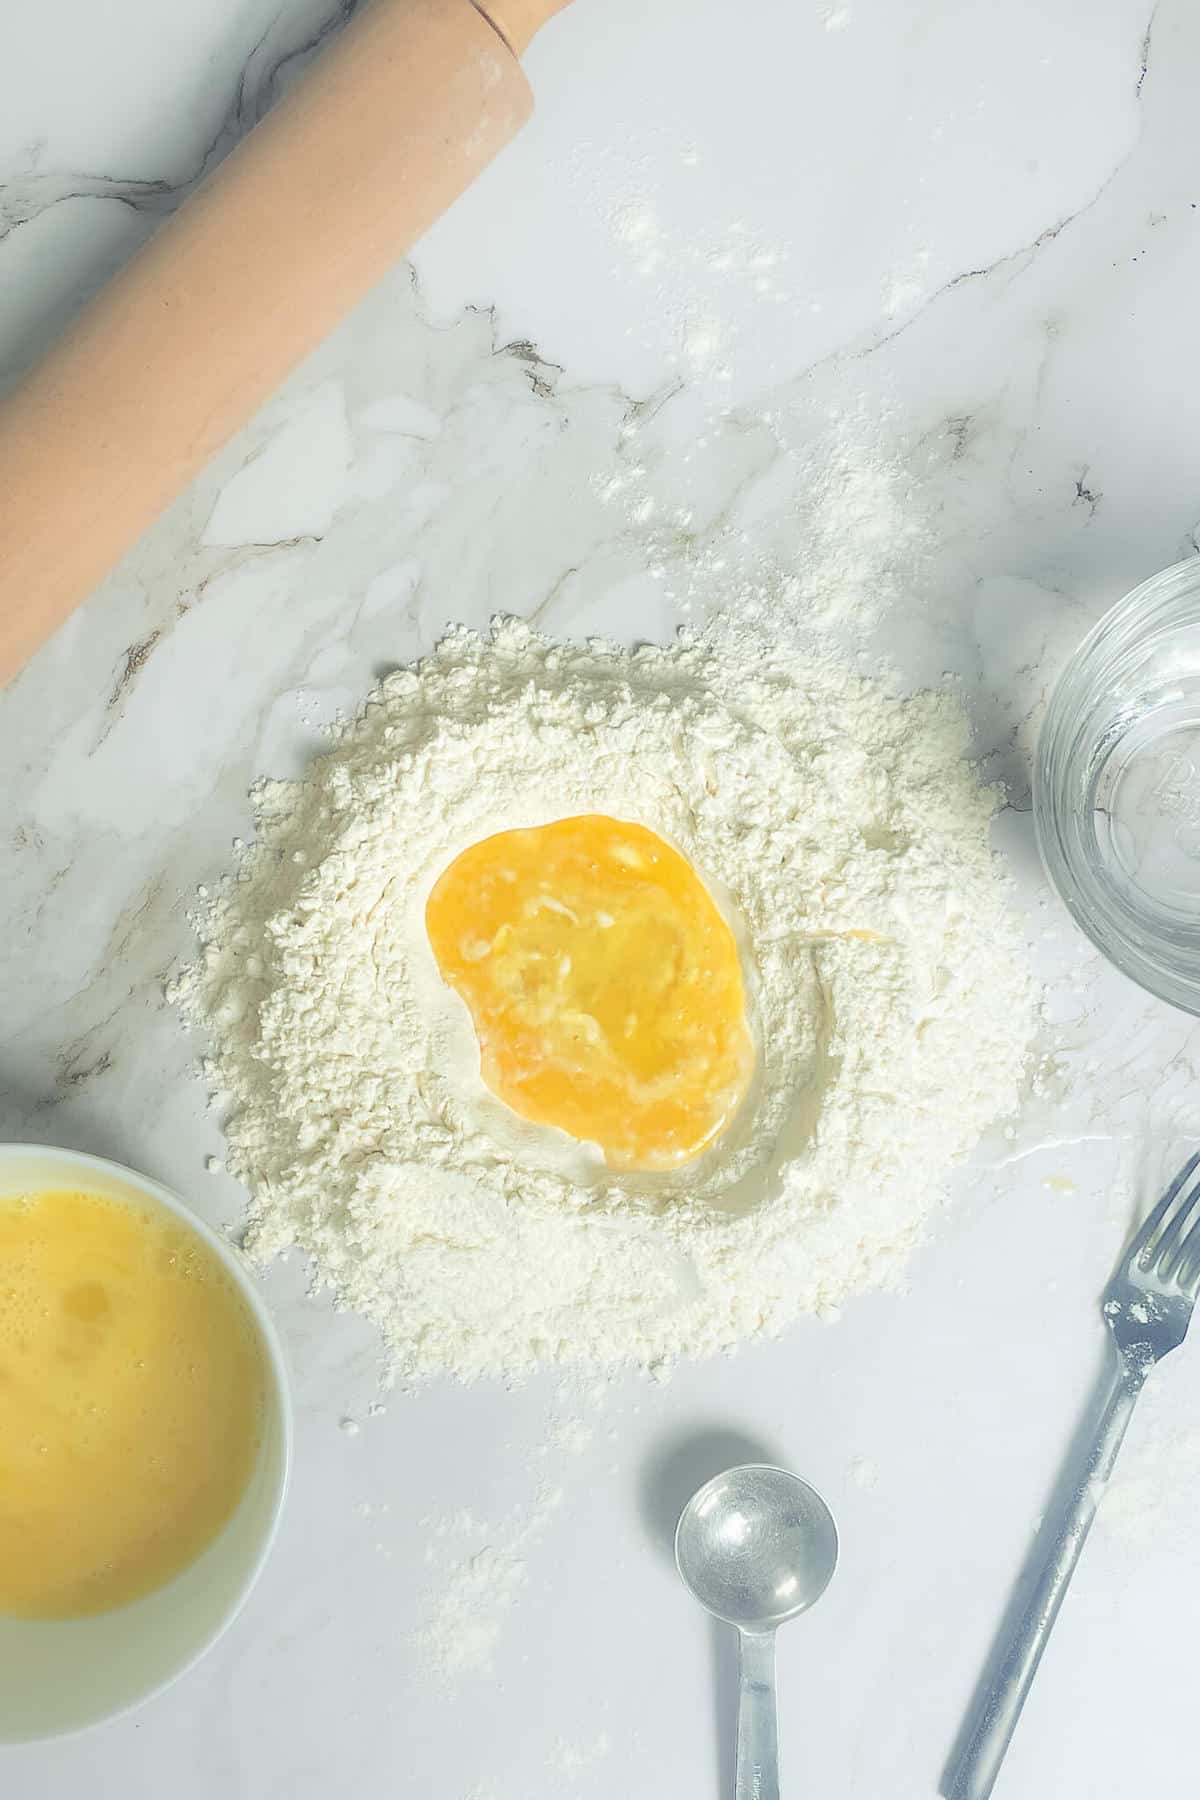 pasta making process, mixing eggs and flour